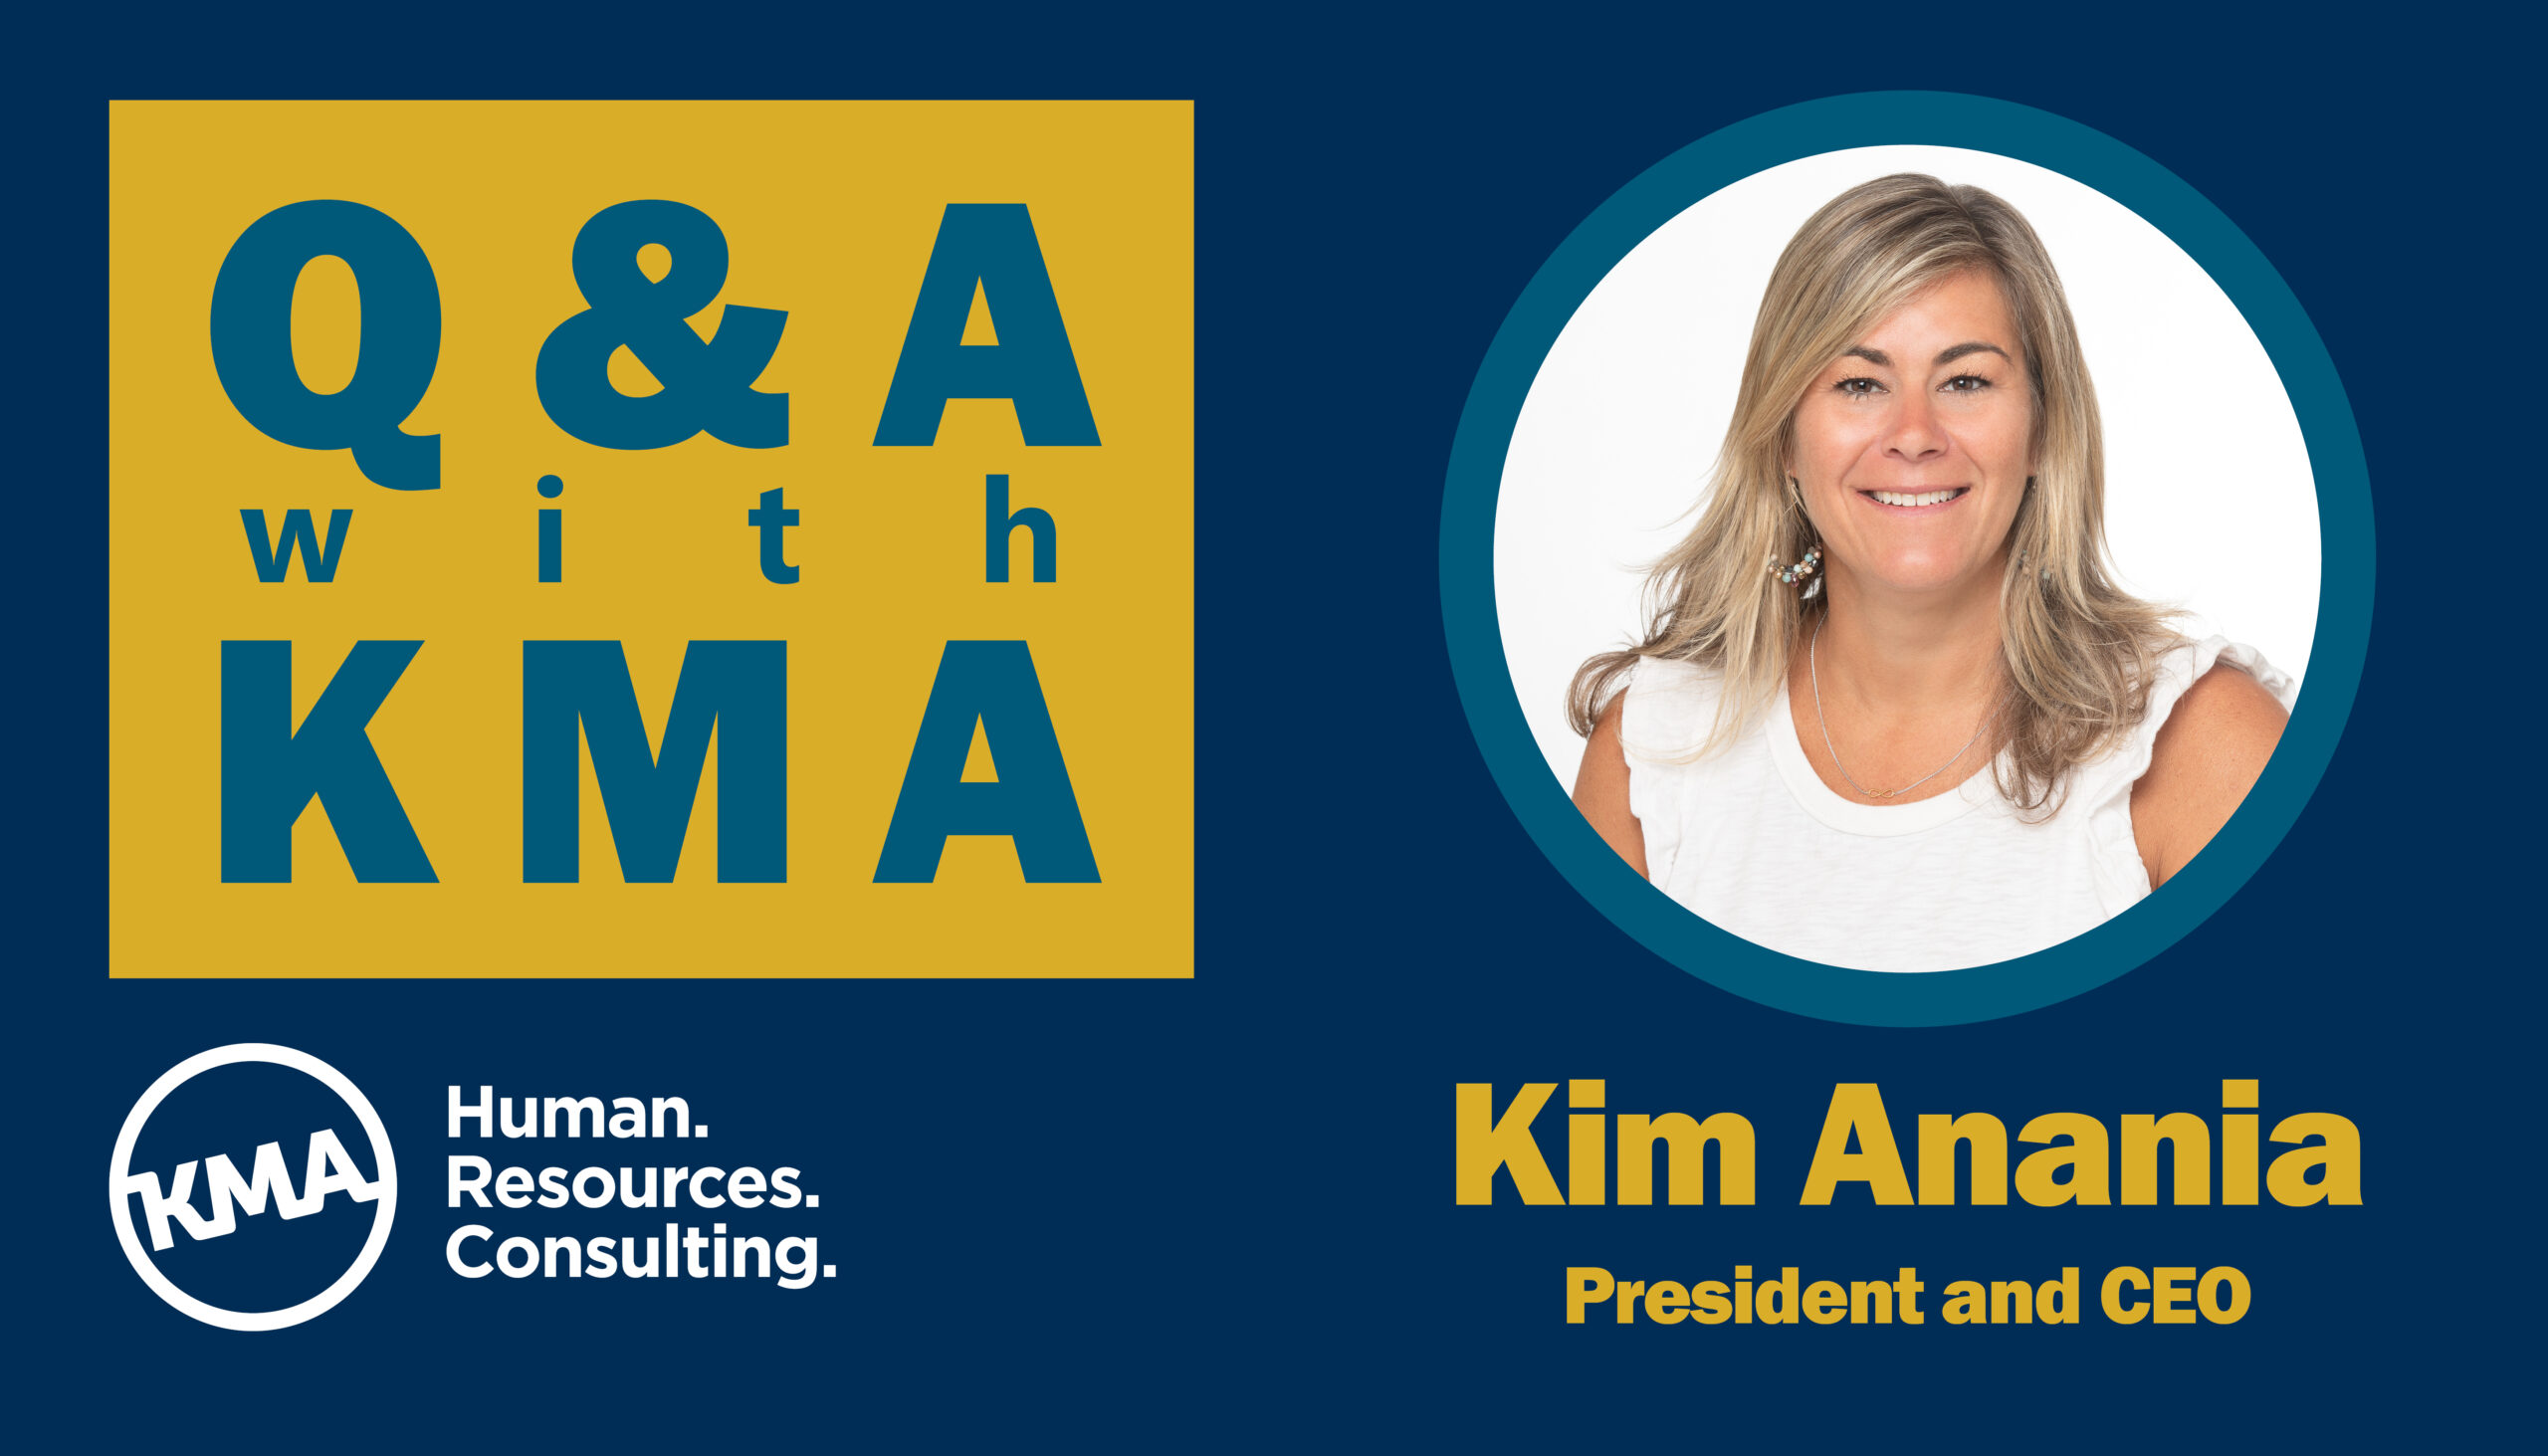 Graphic with title: Q&A with KMA, along with photo of Kim Anania, President and CEO of KMA